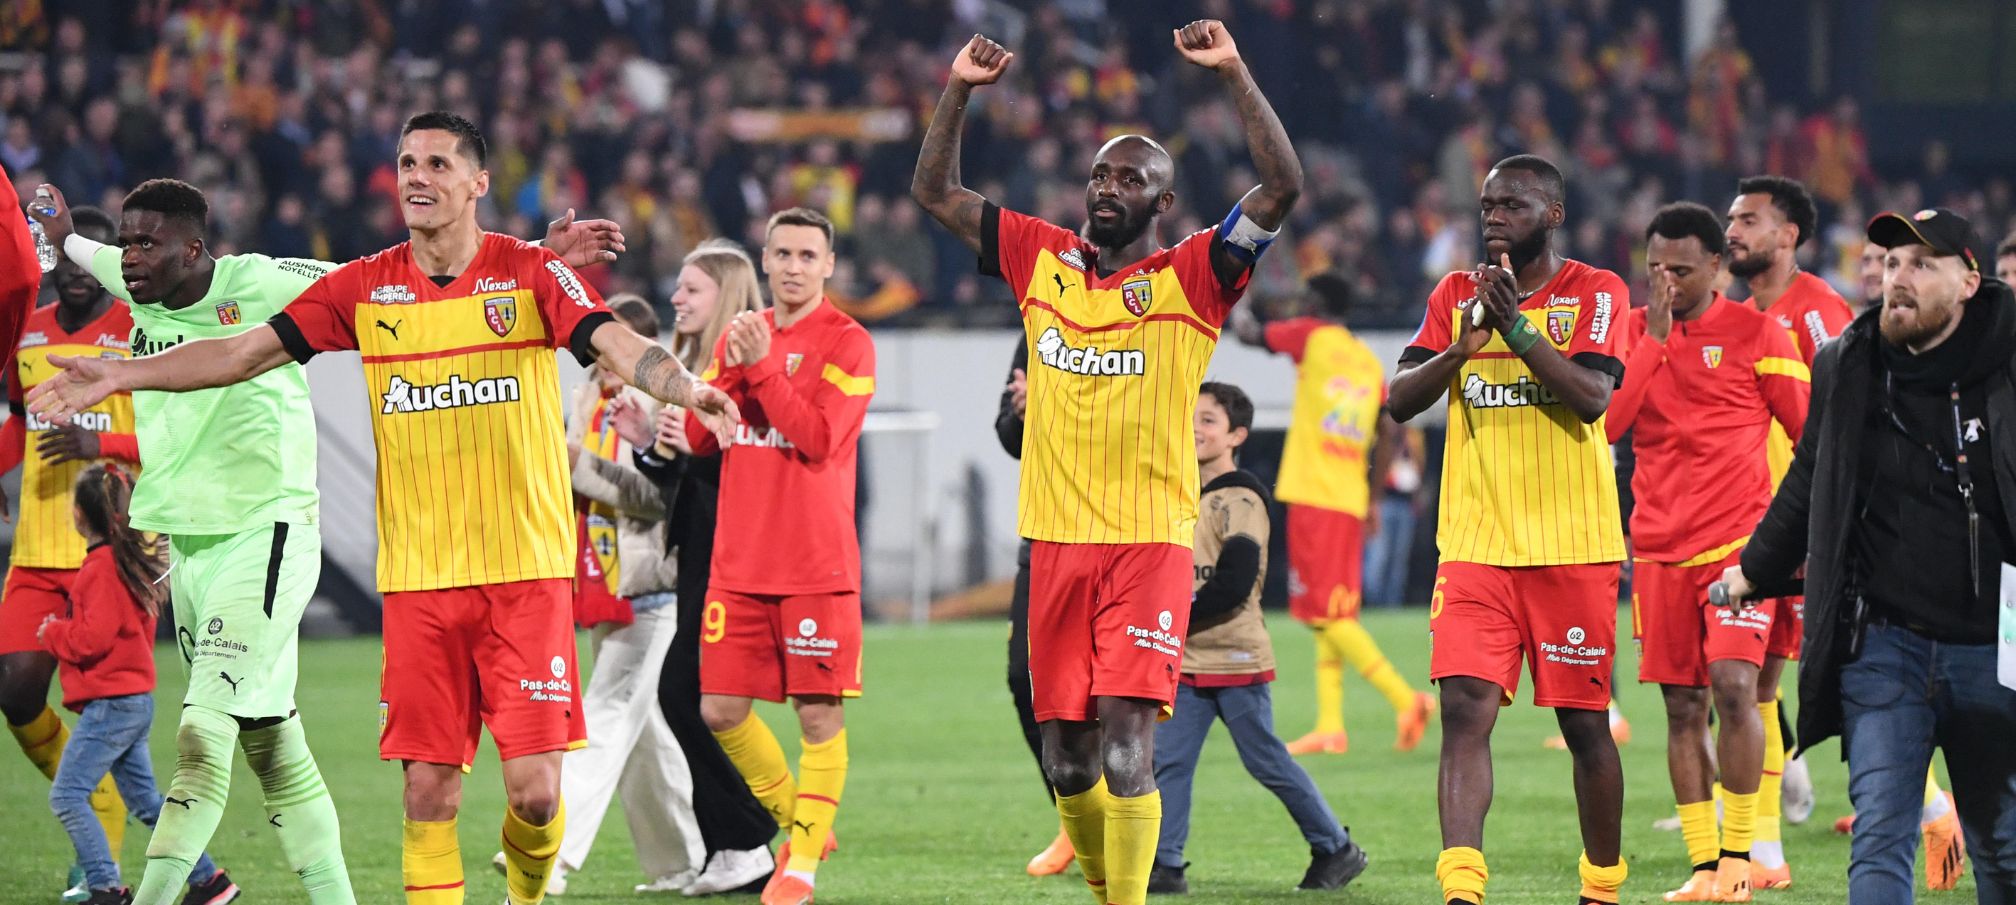 Remarkable season takes Lens to promised land